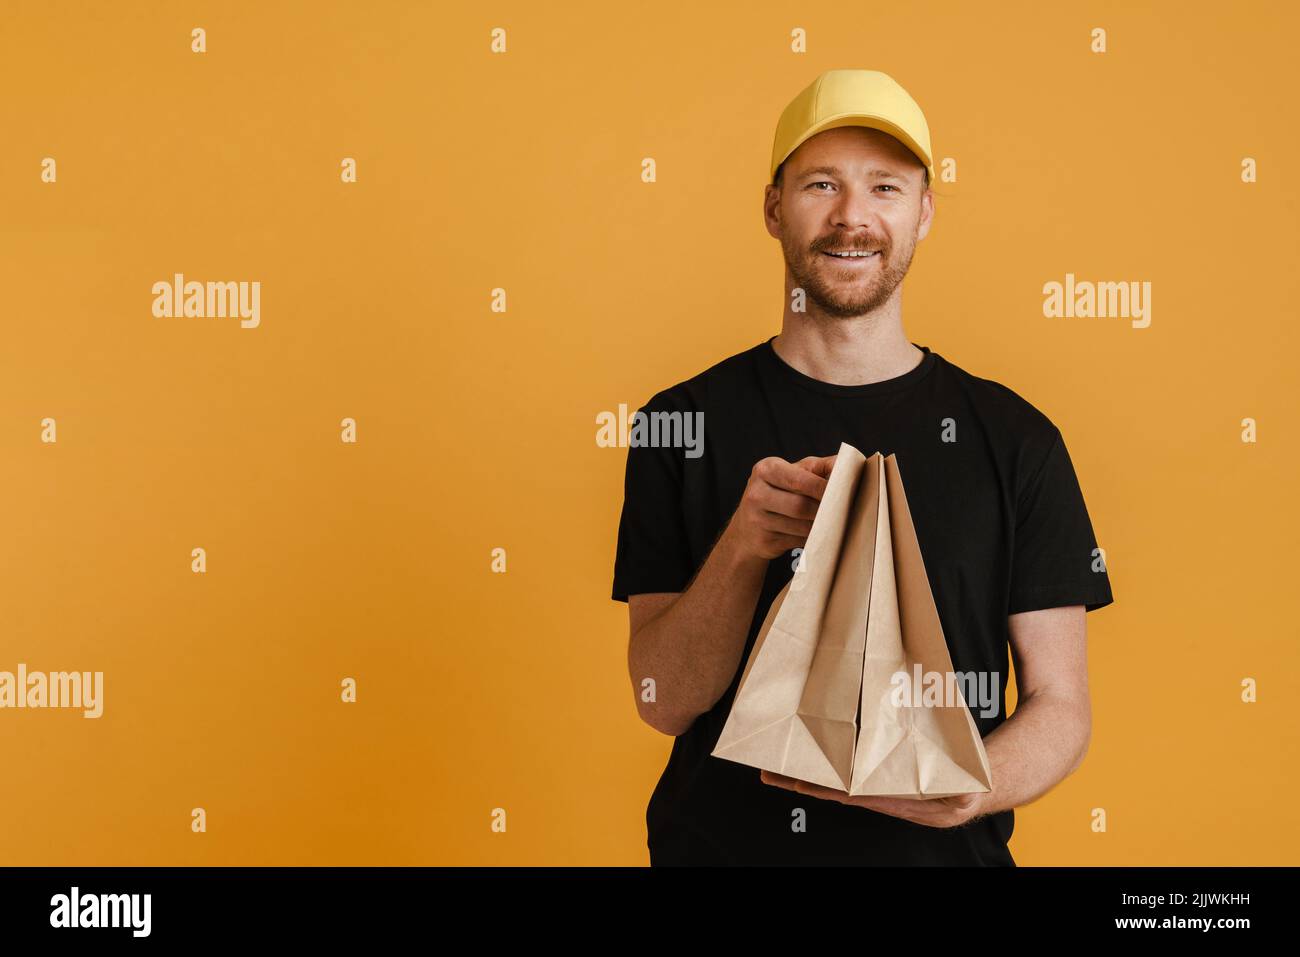 White delivery man in cap smiling while posing with paper bags isolated over yellow background Stock Photo